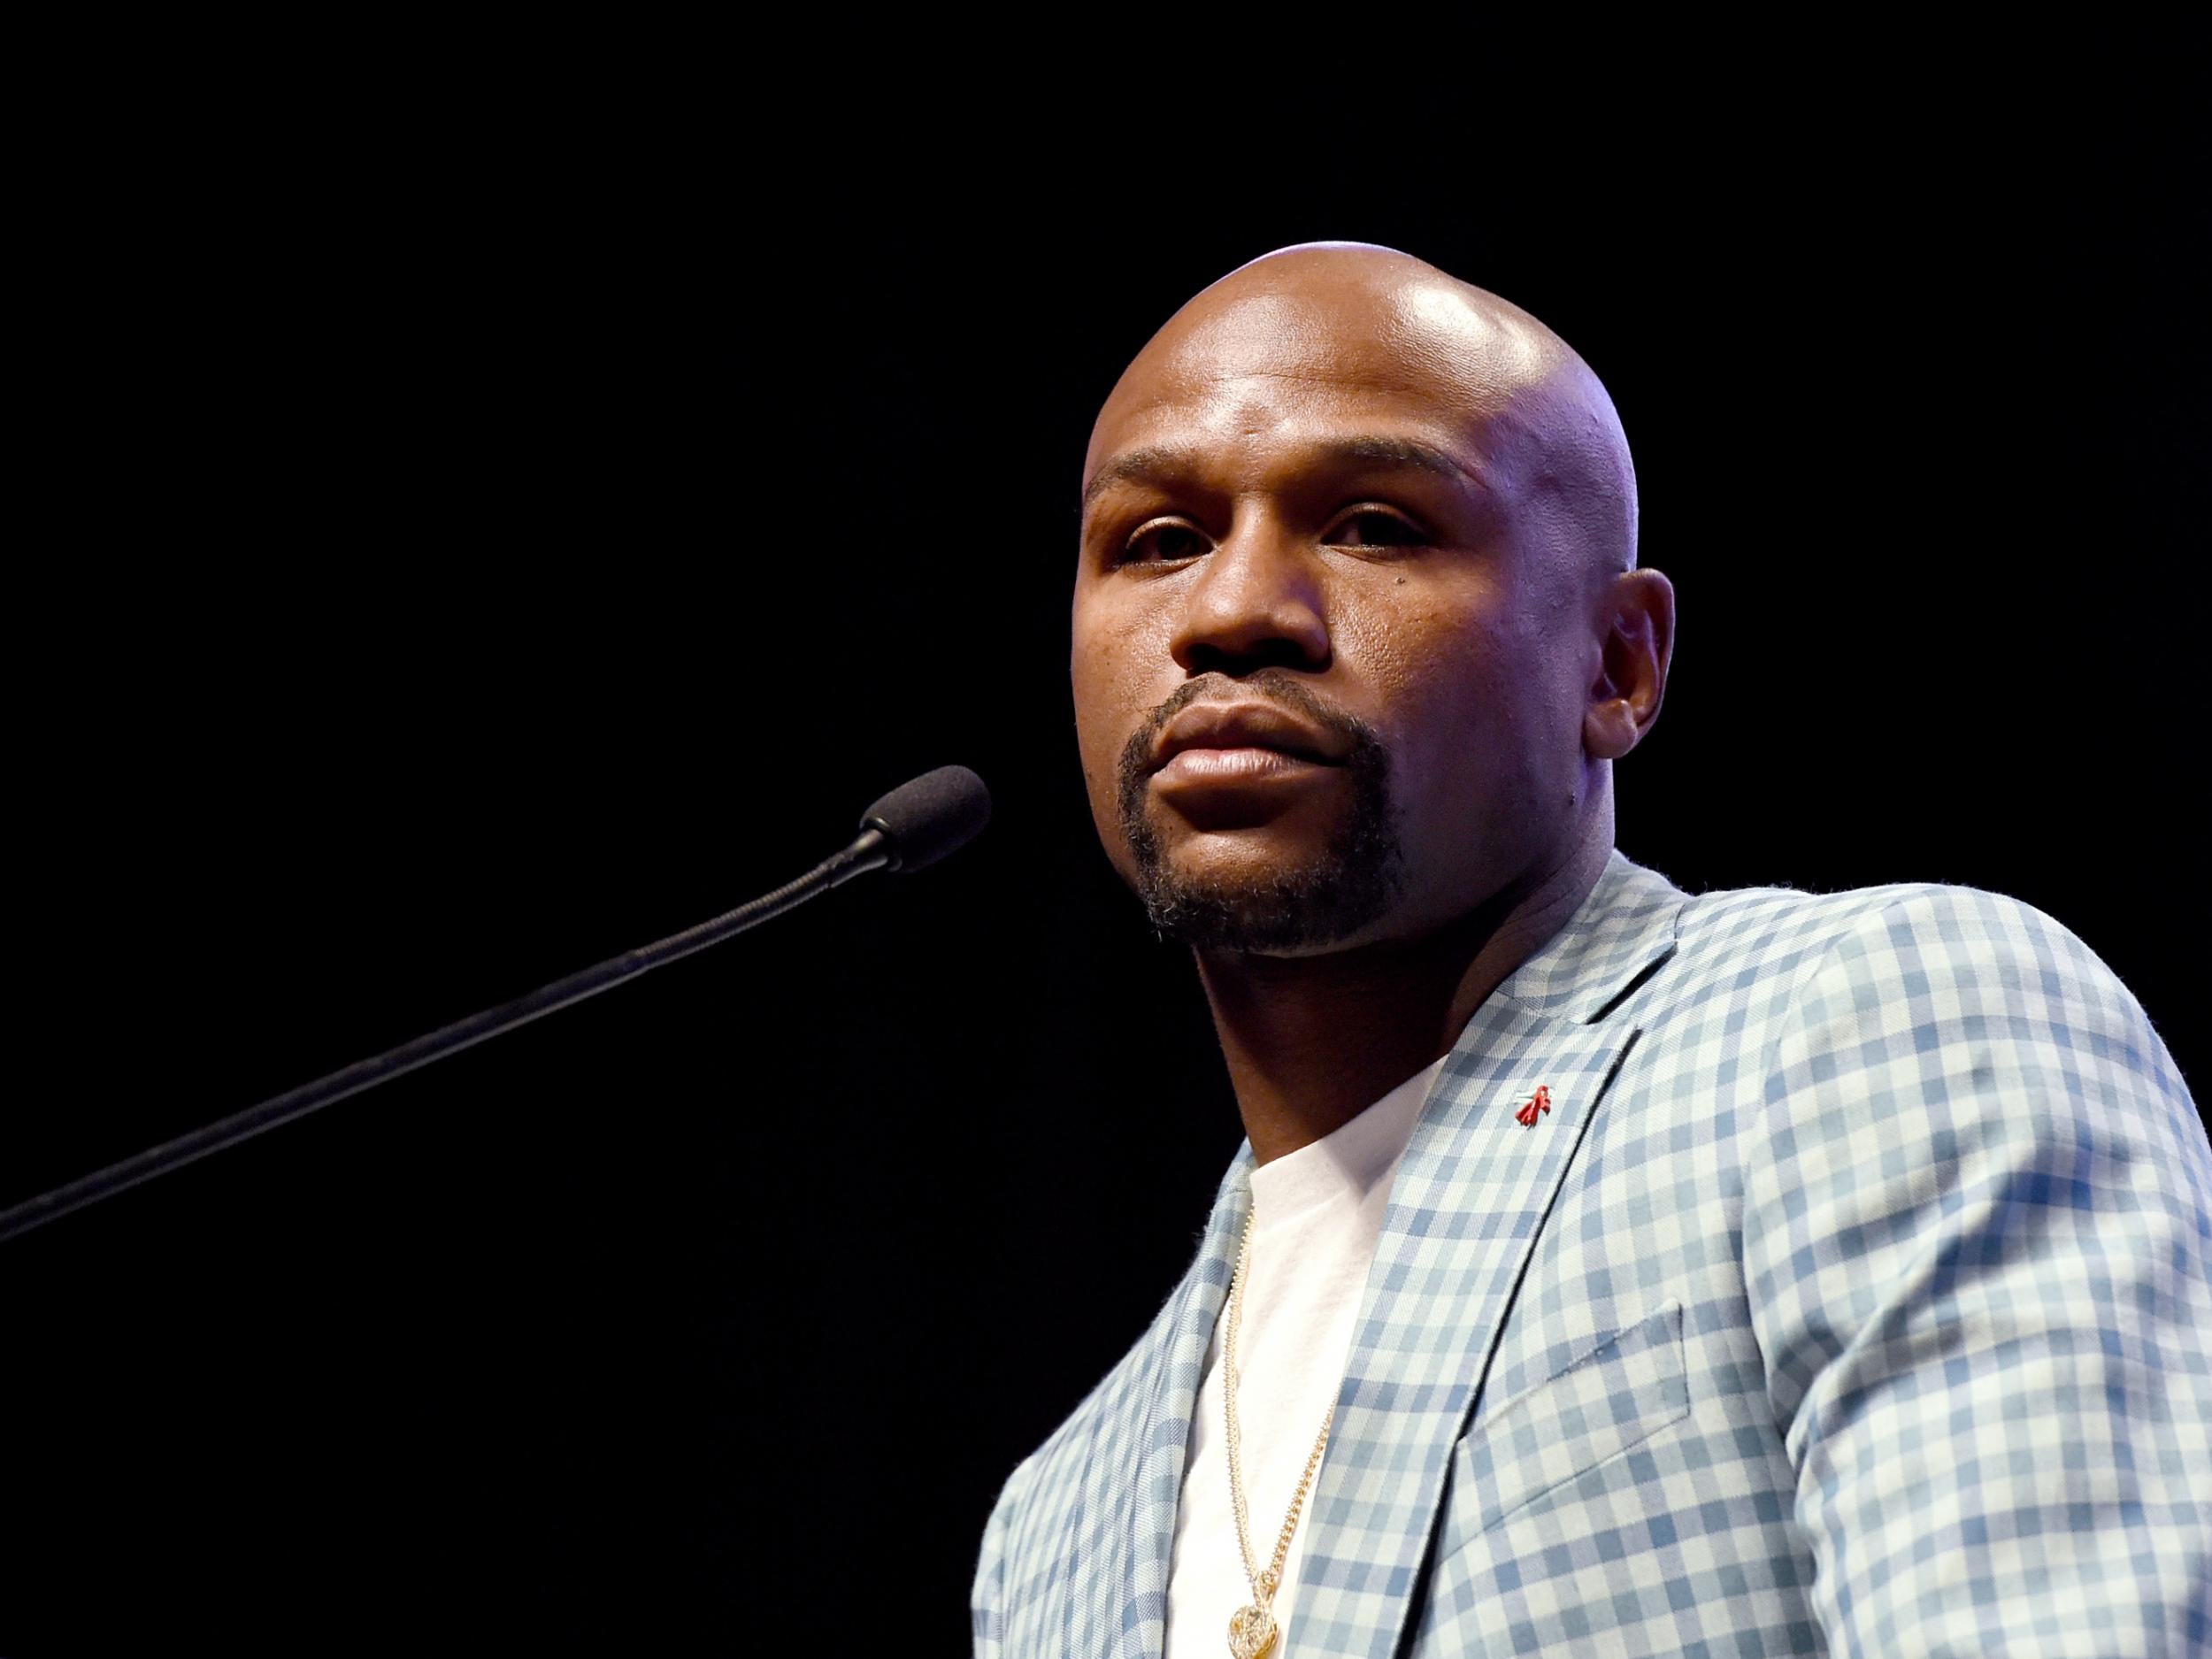 Mayweather insists he is giving the fans what they want to see